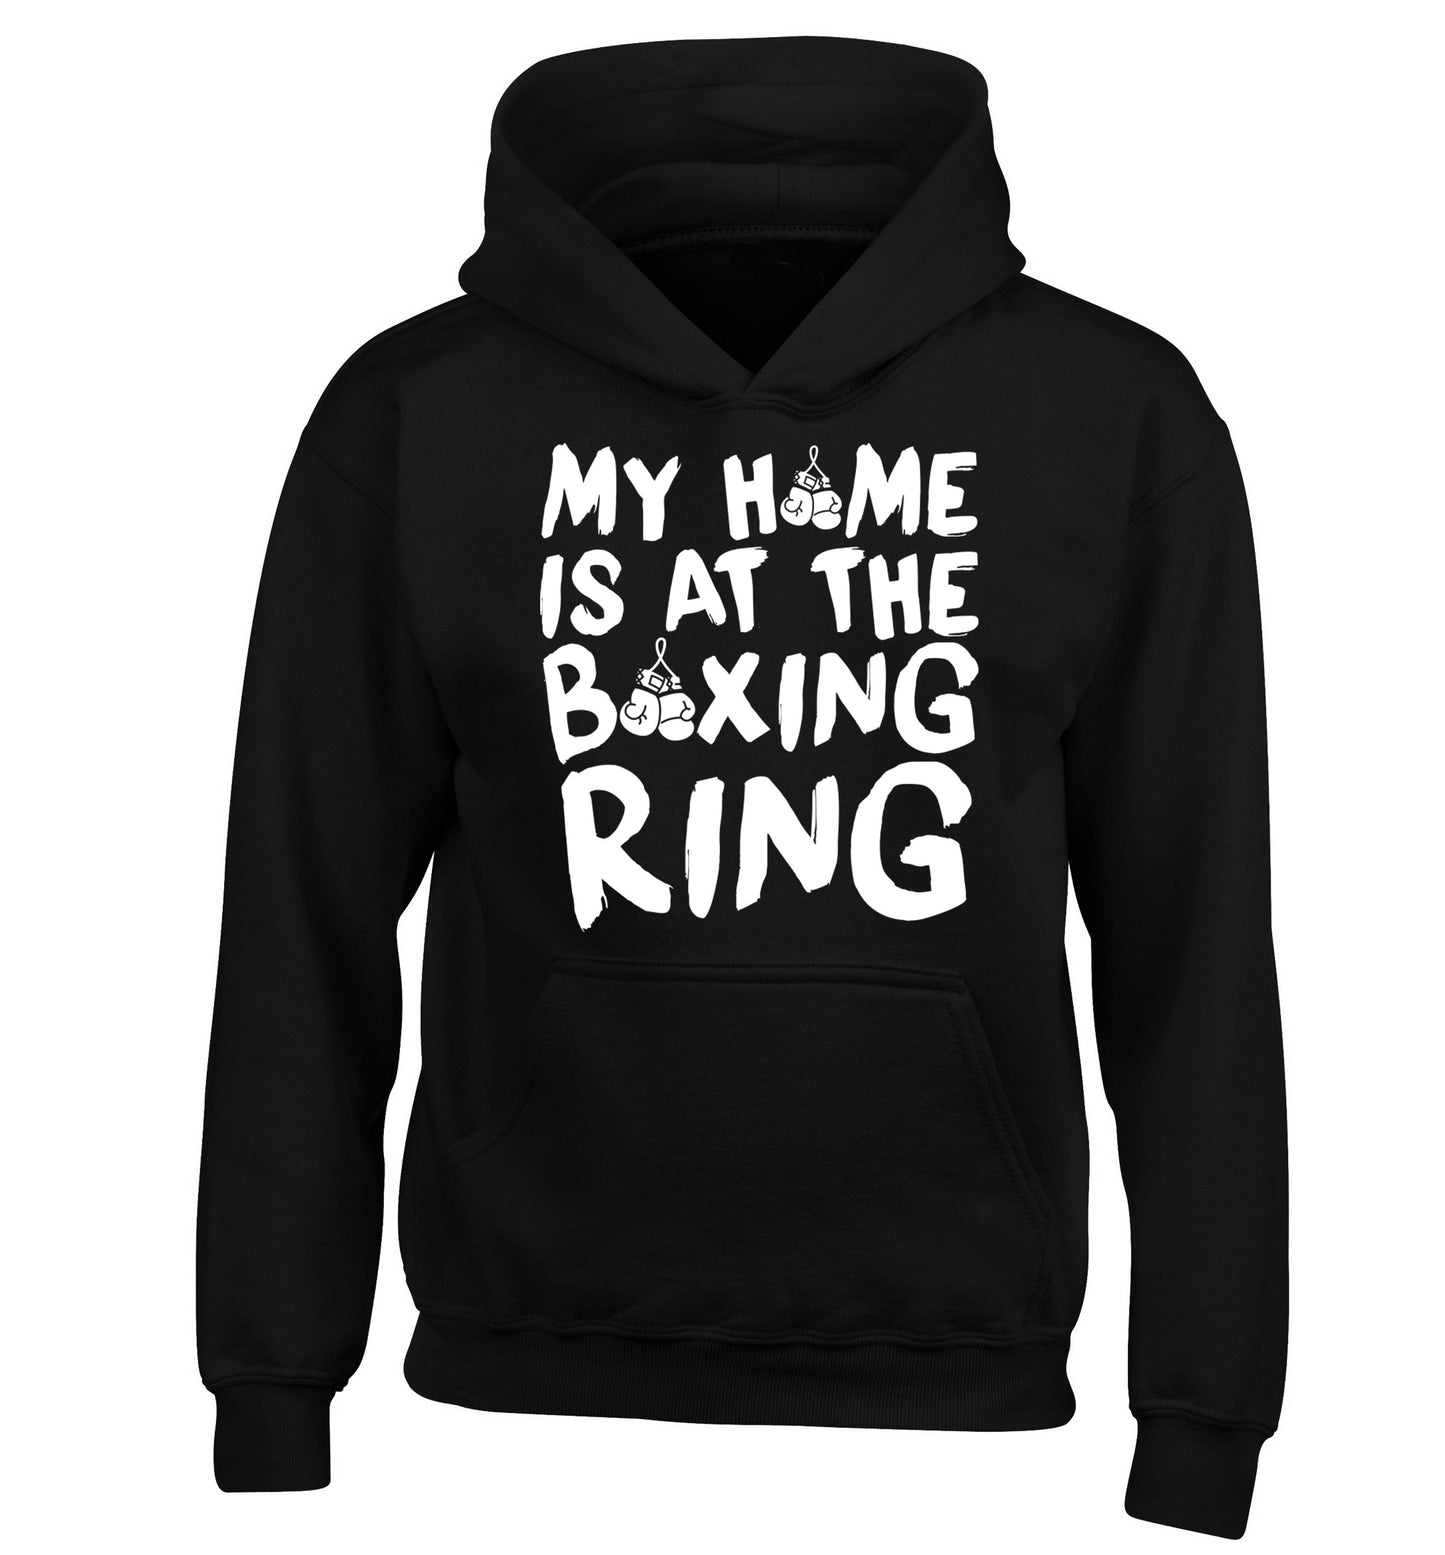 My home is at the boxing ring children's black hoodie 12-14 Years